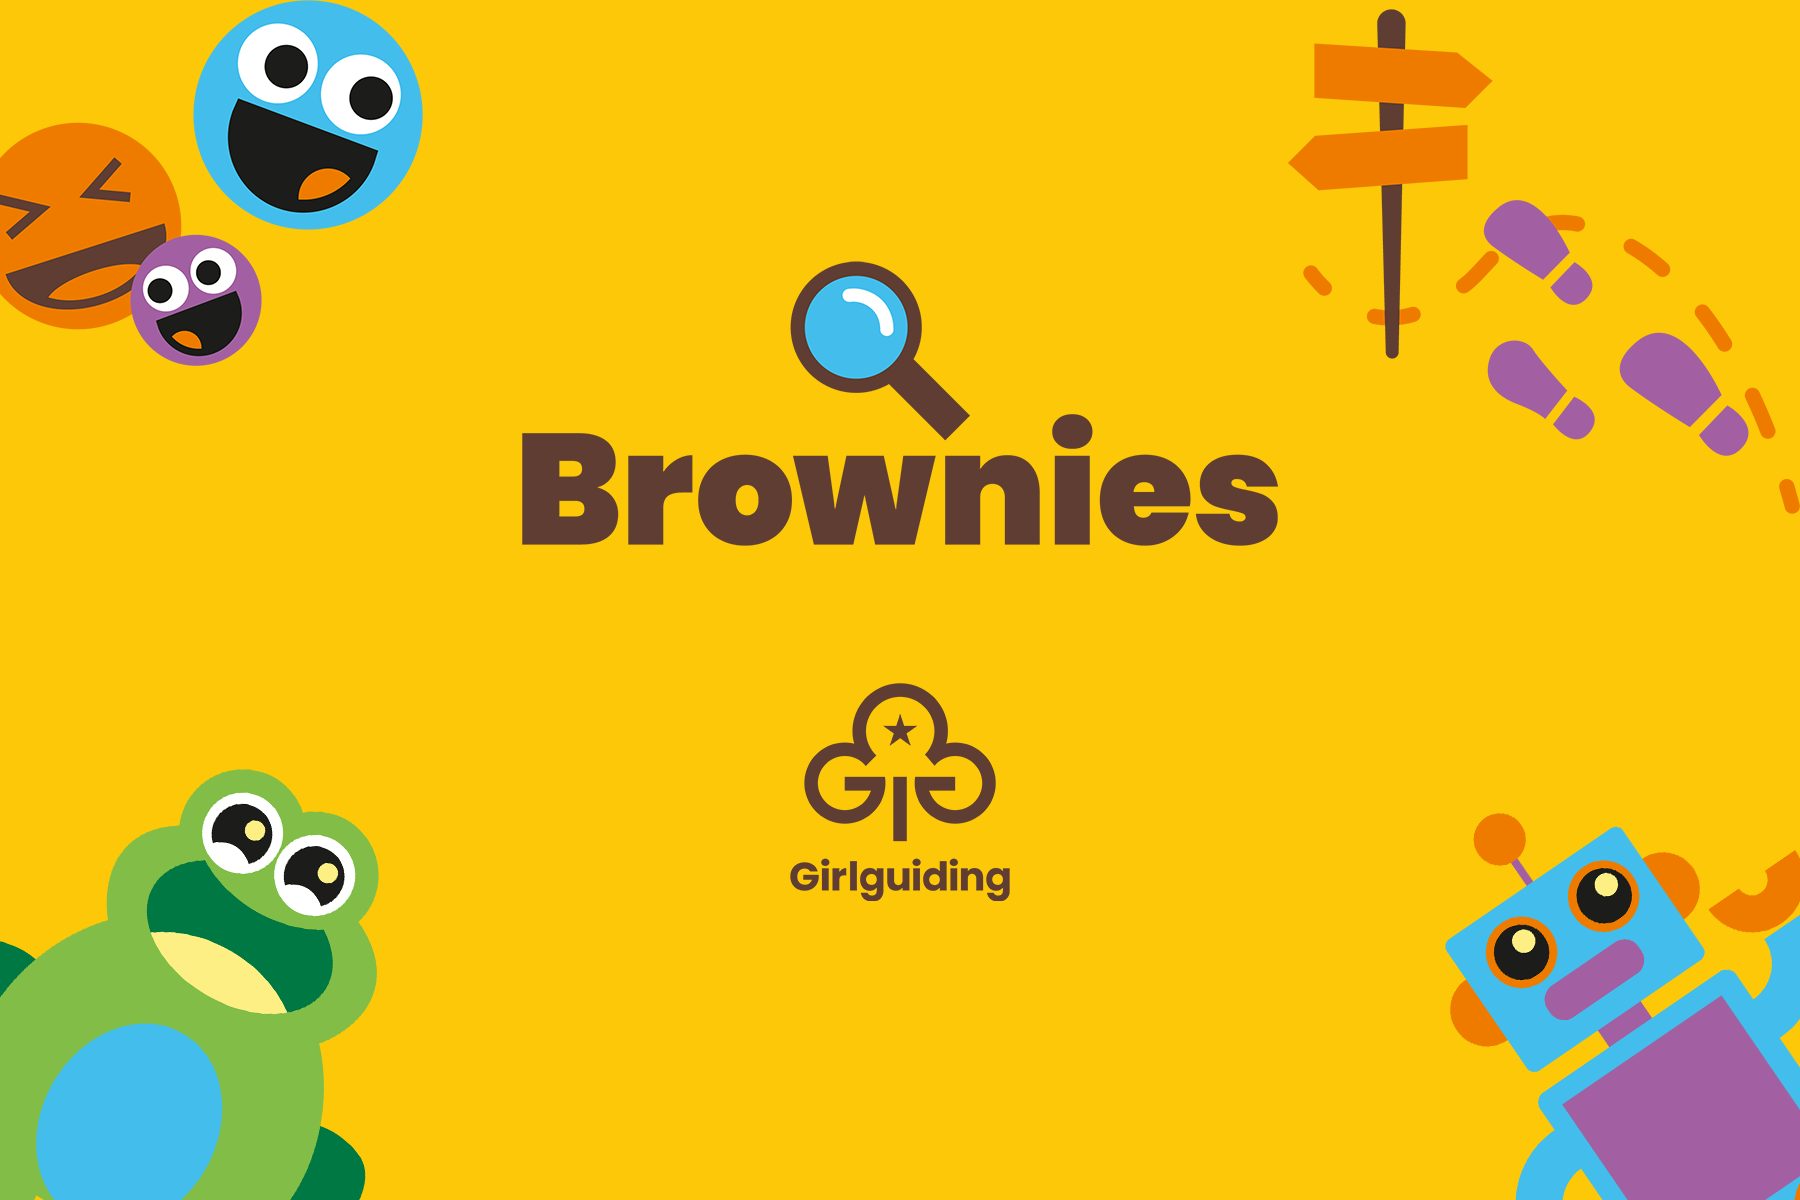 Graphic shows the new Brownies branding, featuring a brown wordmark with a magnifying glass, on a yellow background